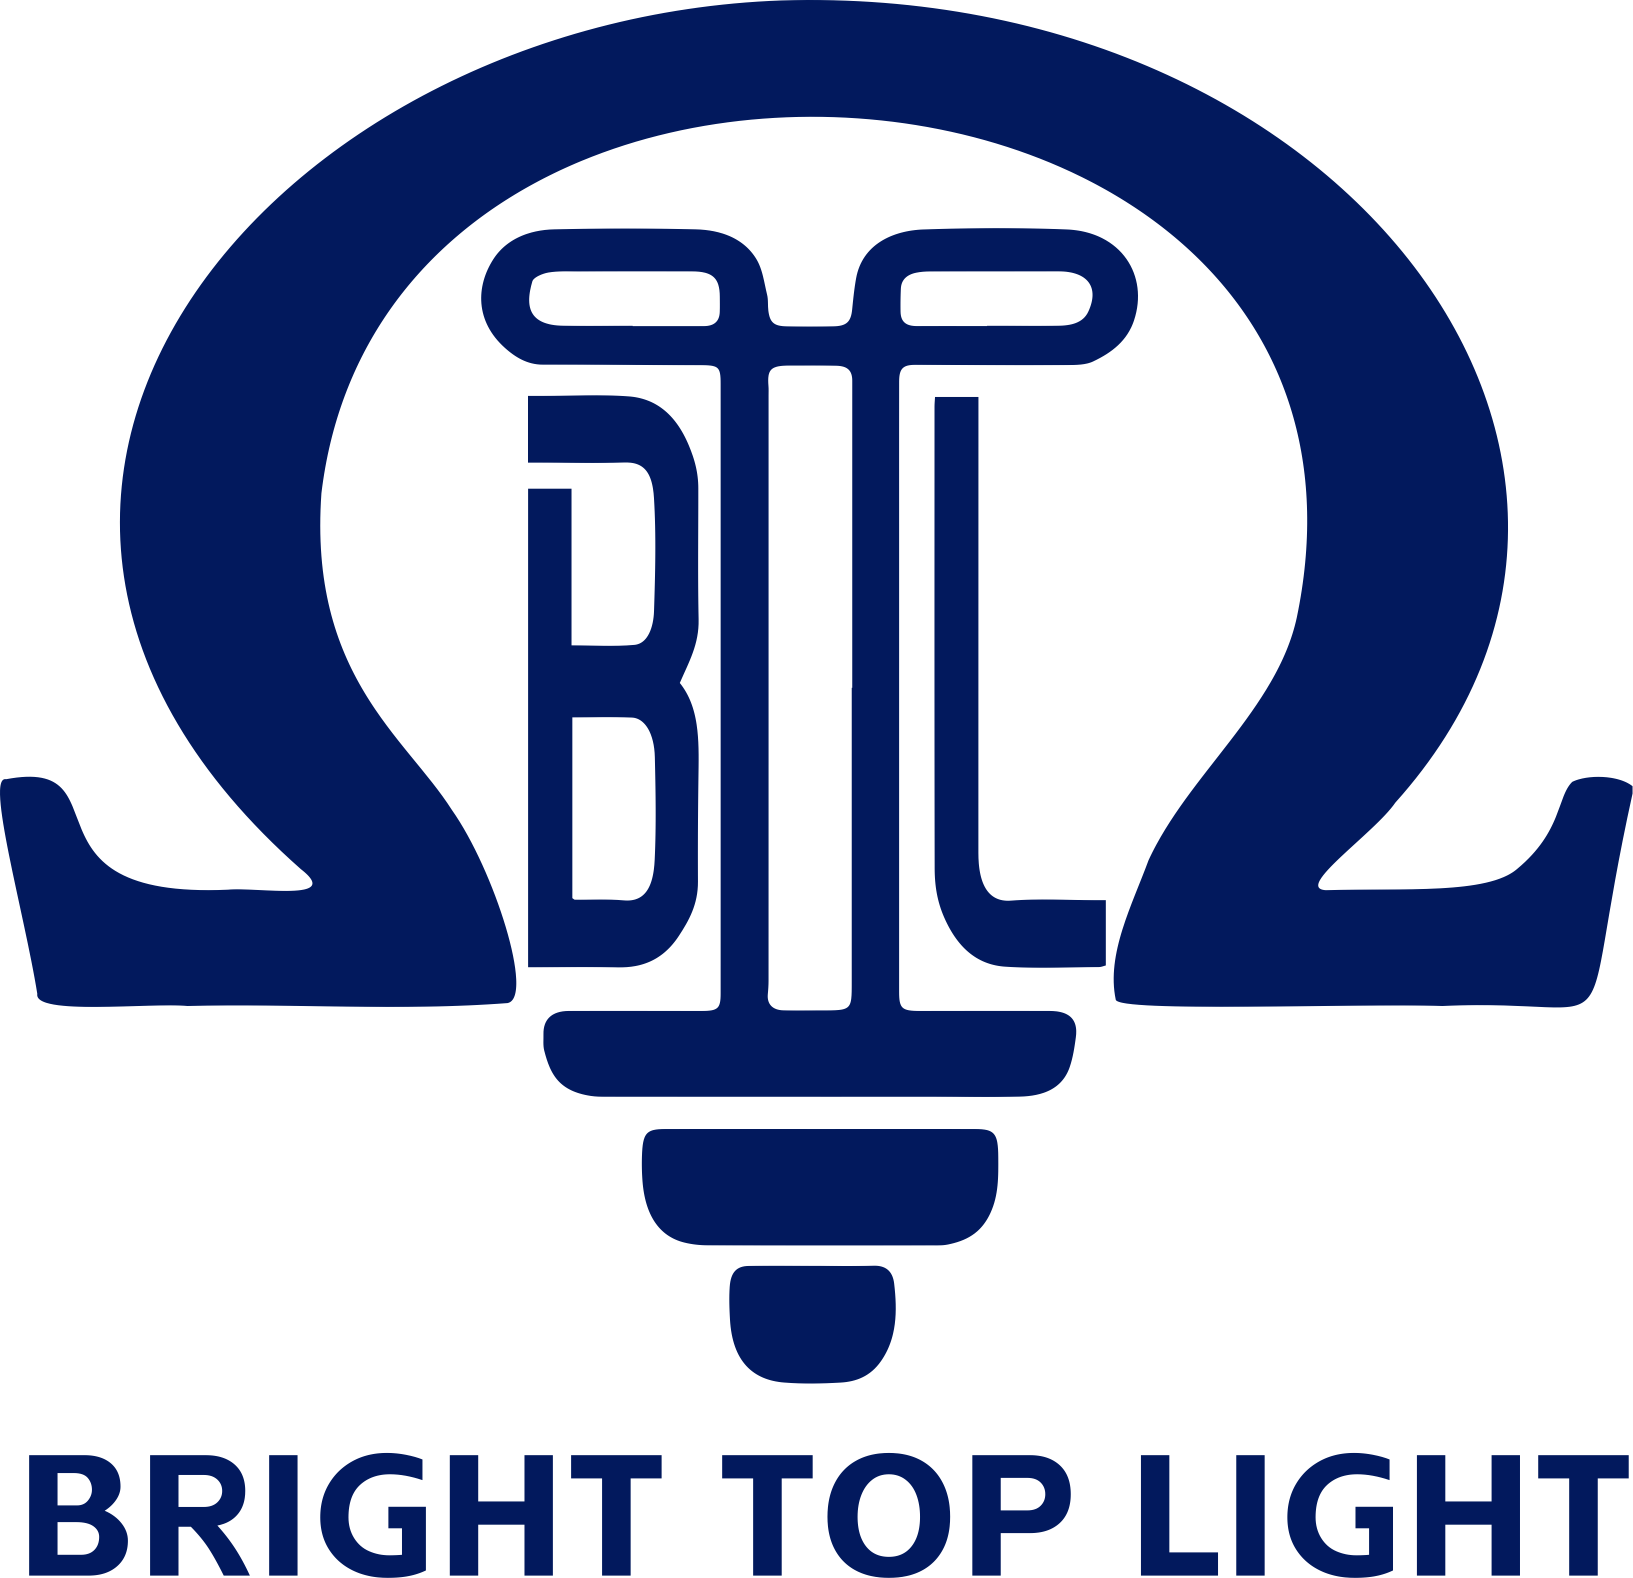 BTLProlight is focus on stage lights more than 12 years, our main products are led moving head wash light, led strobe light, moving head light, led par light and others.